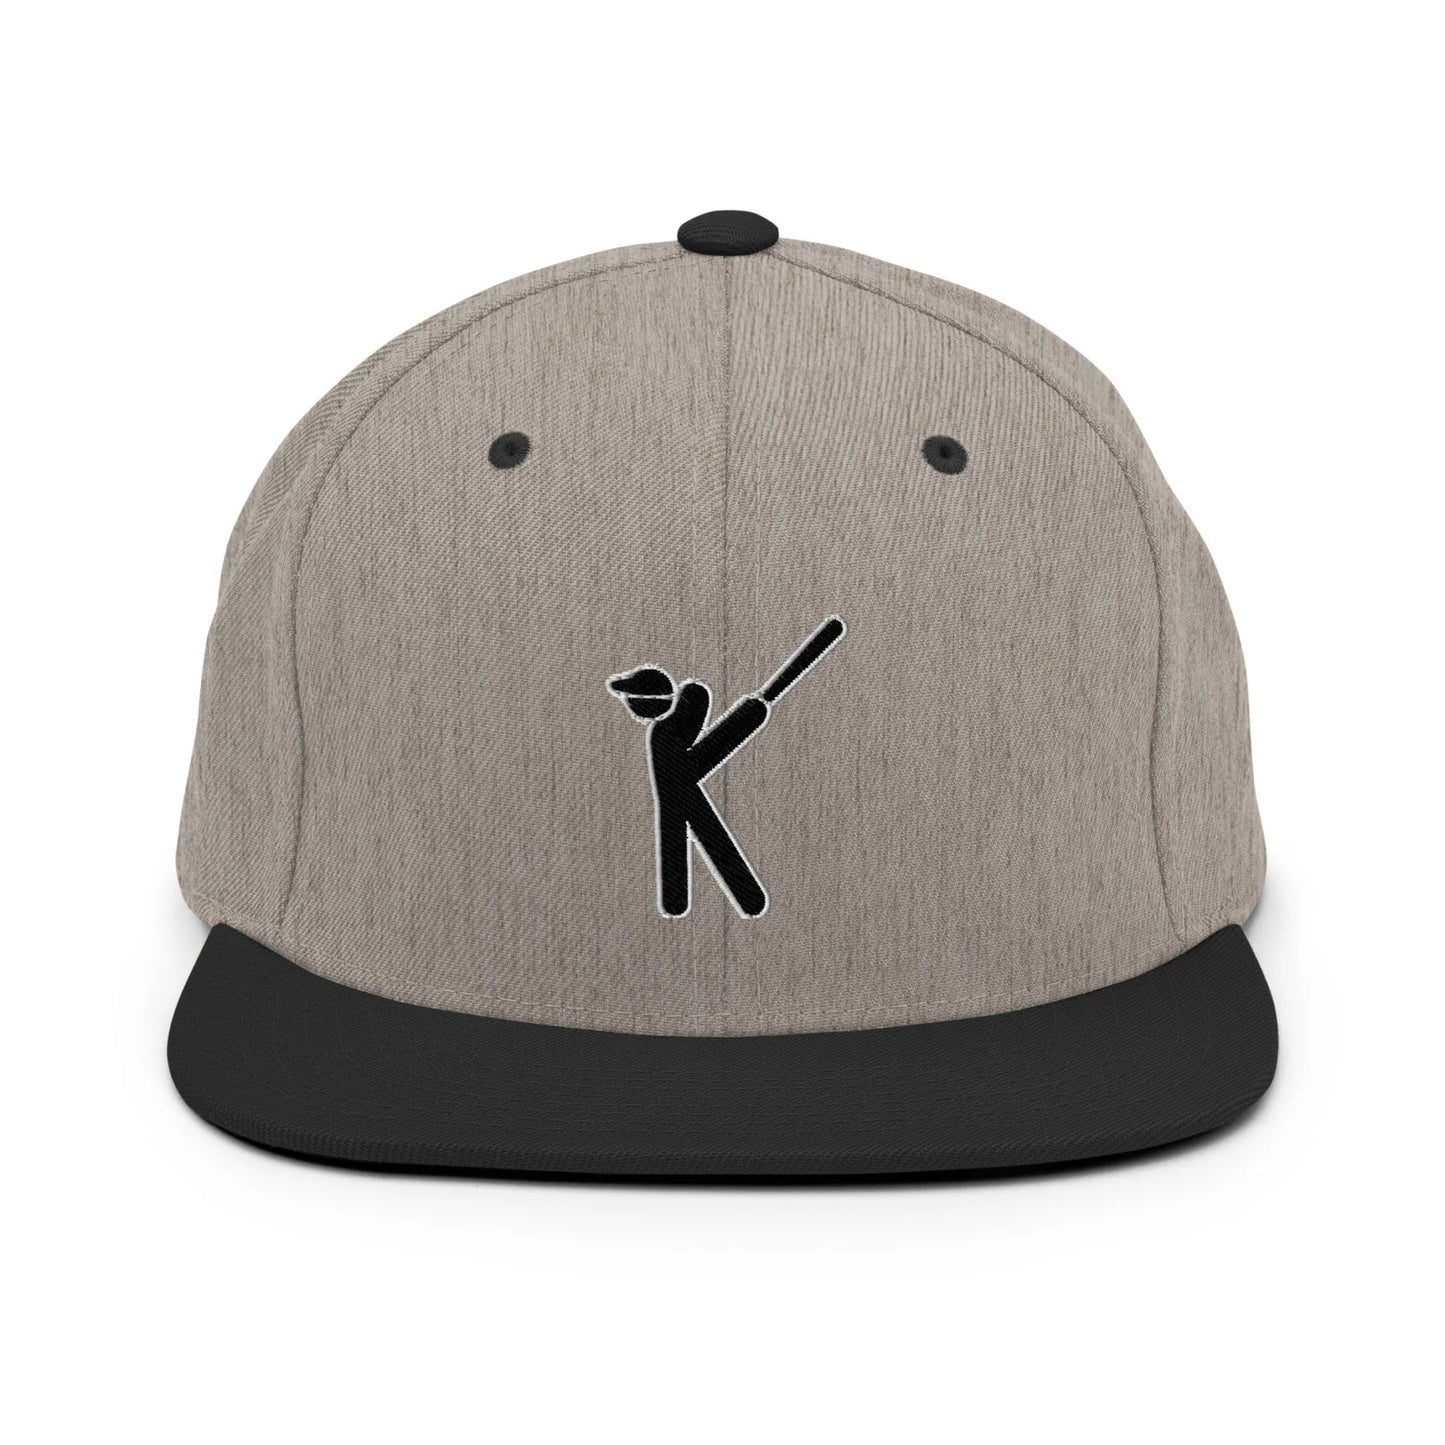 Kasabe ShowZone snapback hat in heather grey with black brim and accents